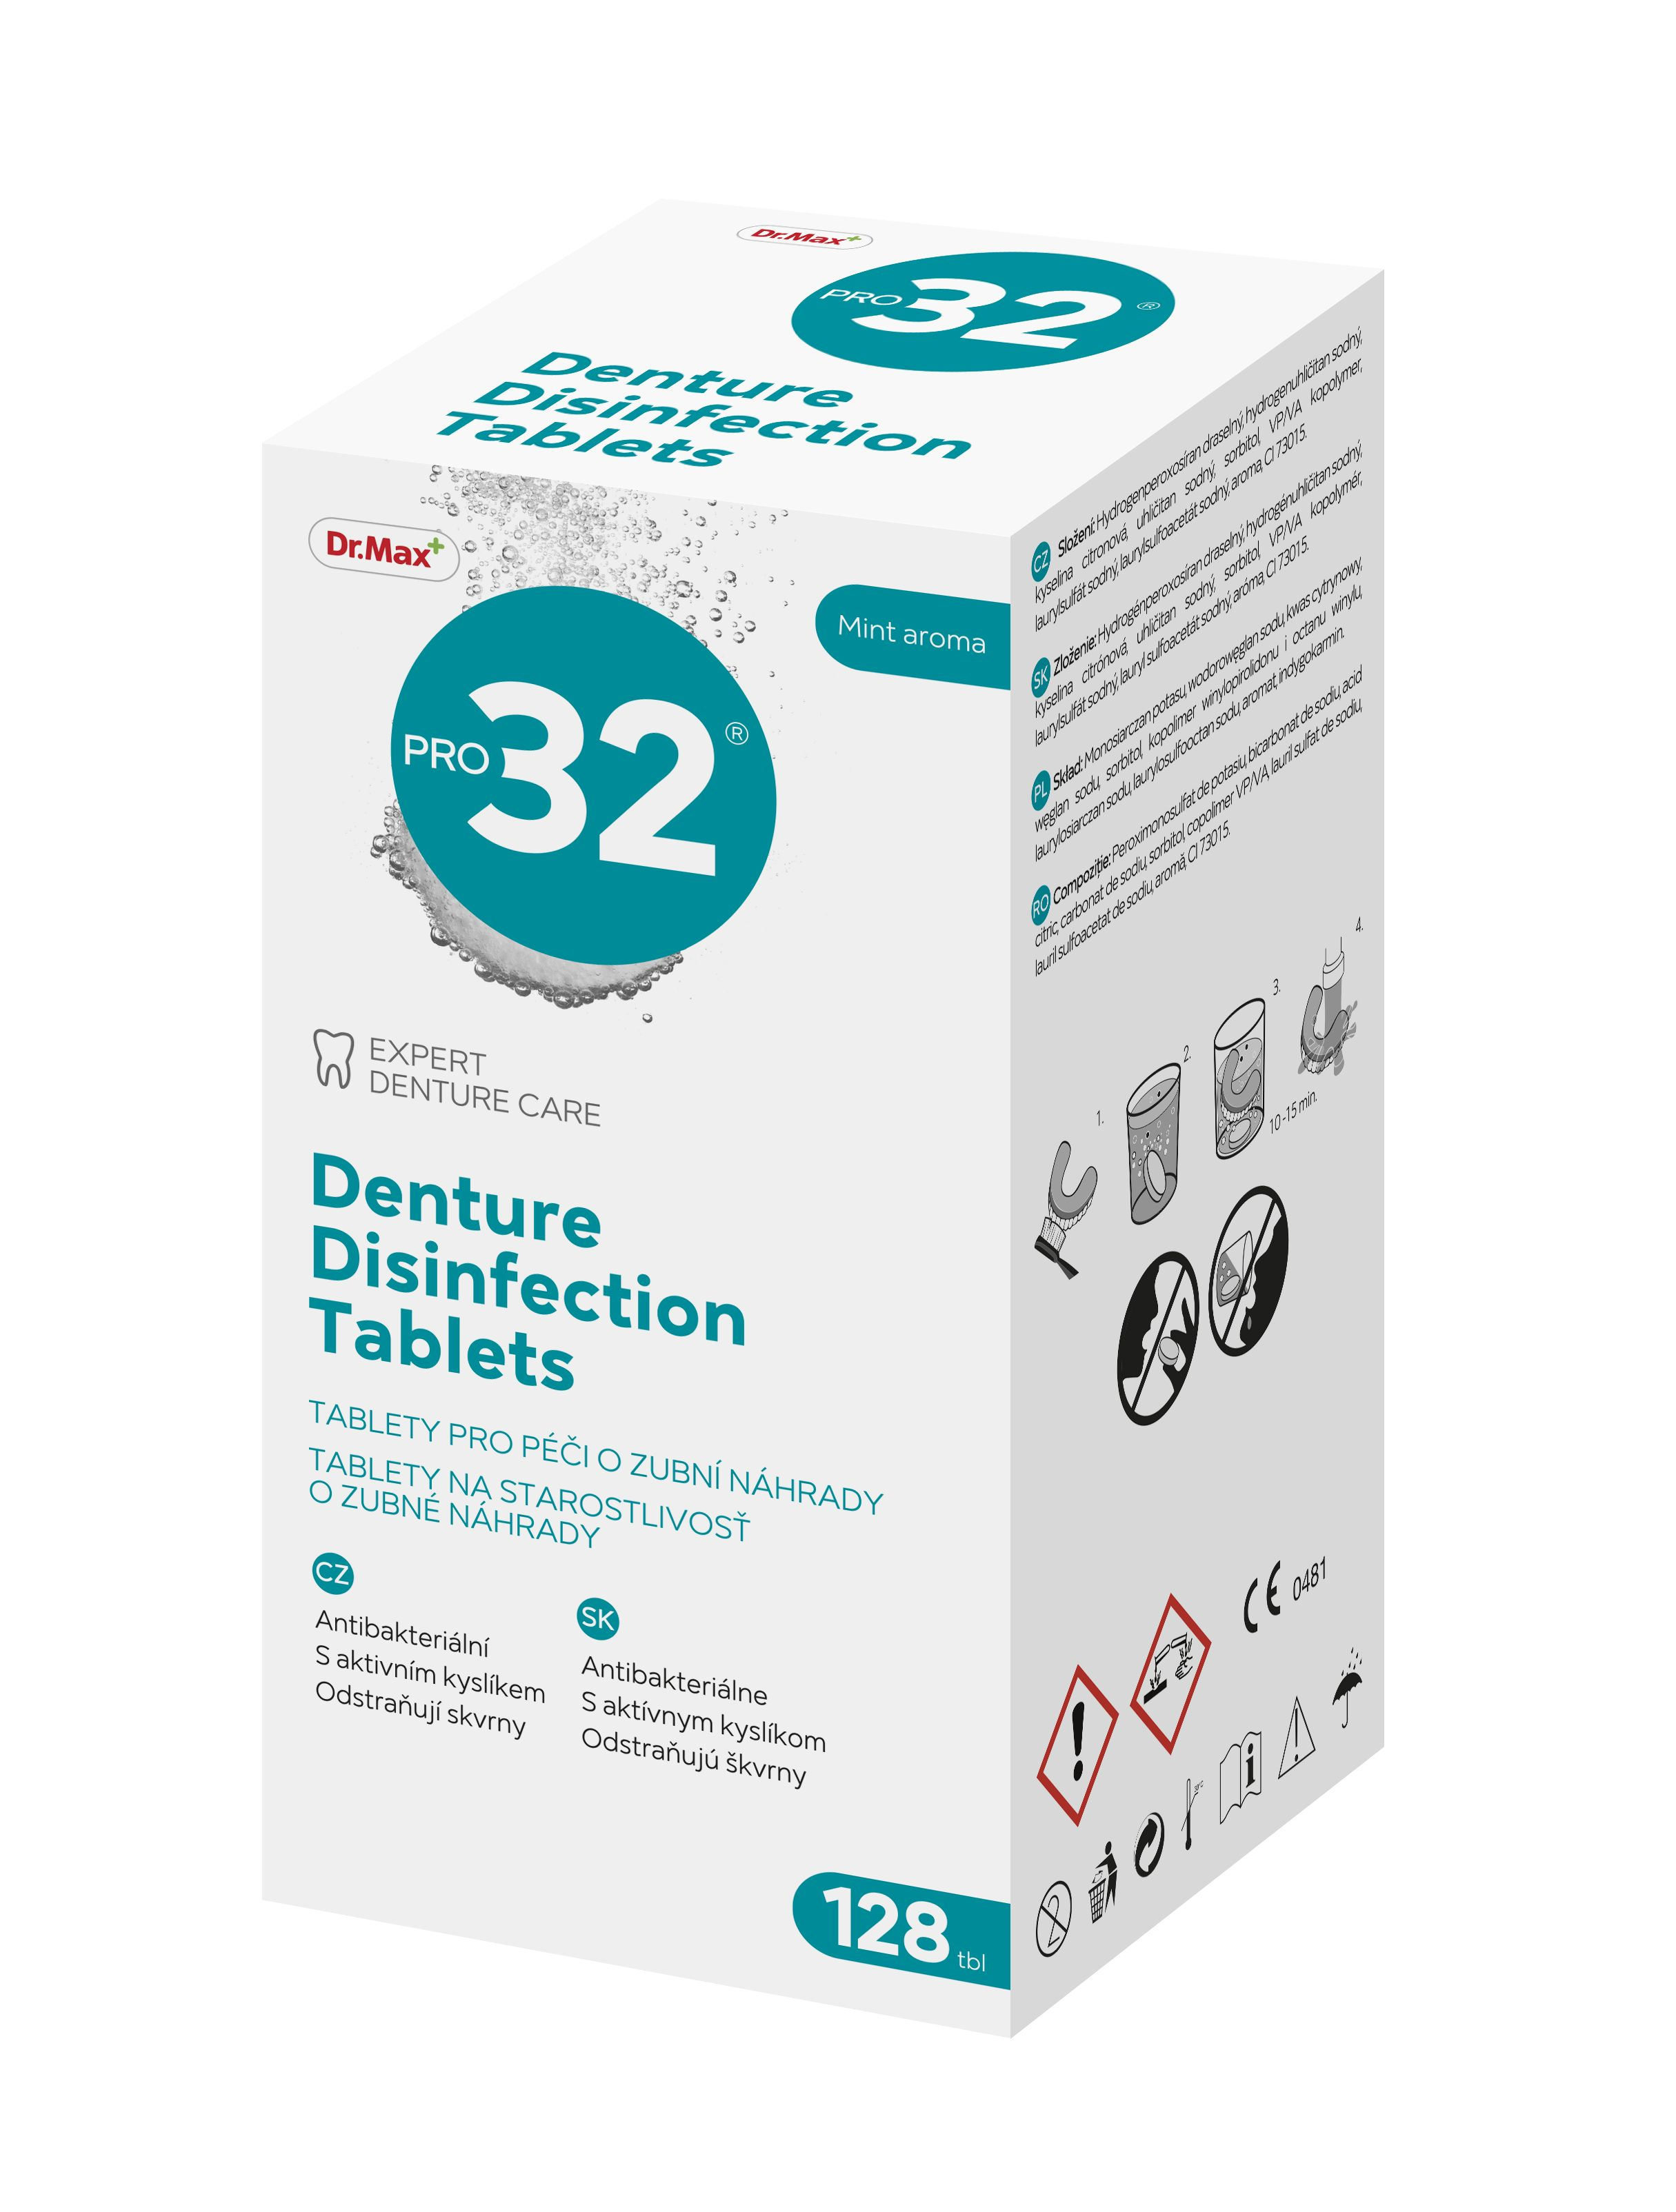 Dr.Max PRO32 Denture Disinfection Tablets 128 tablet Dr.Max